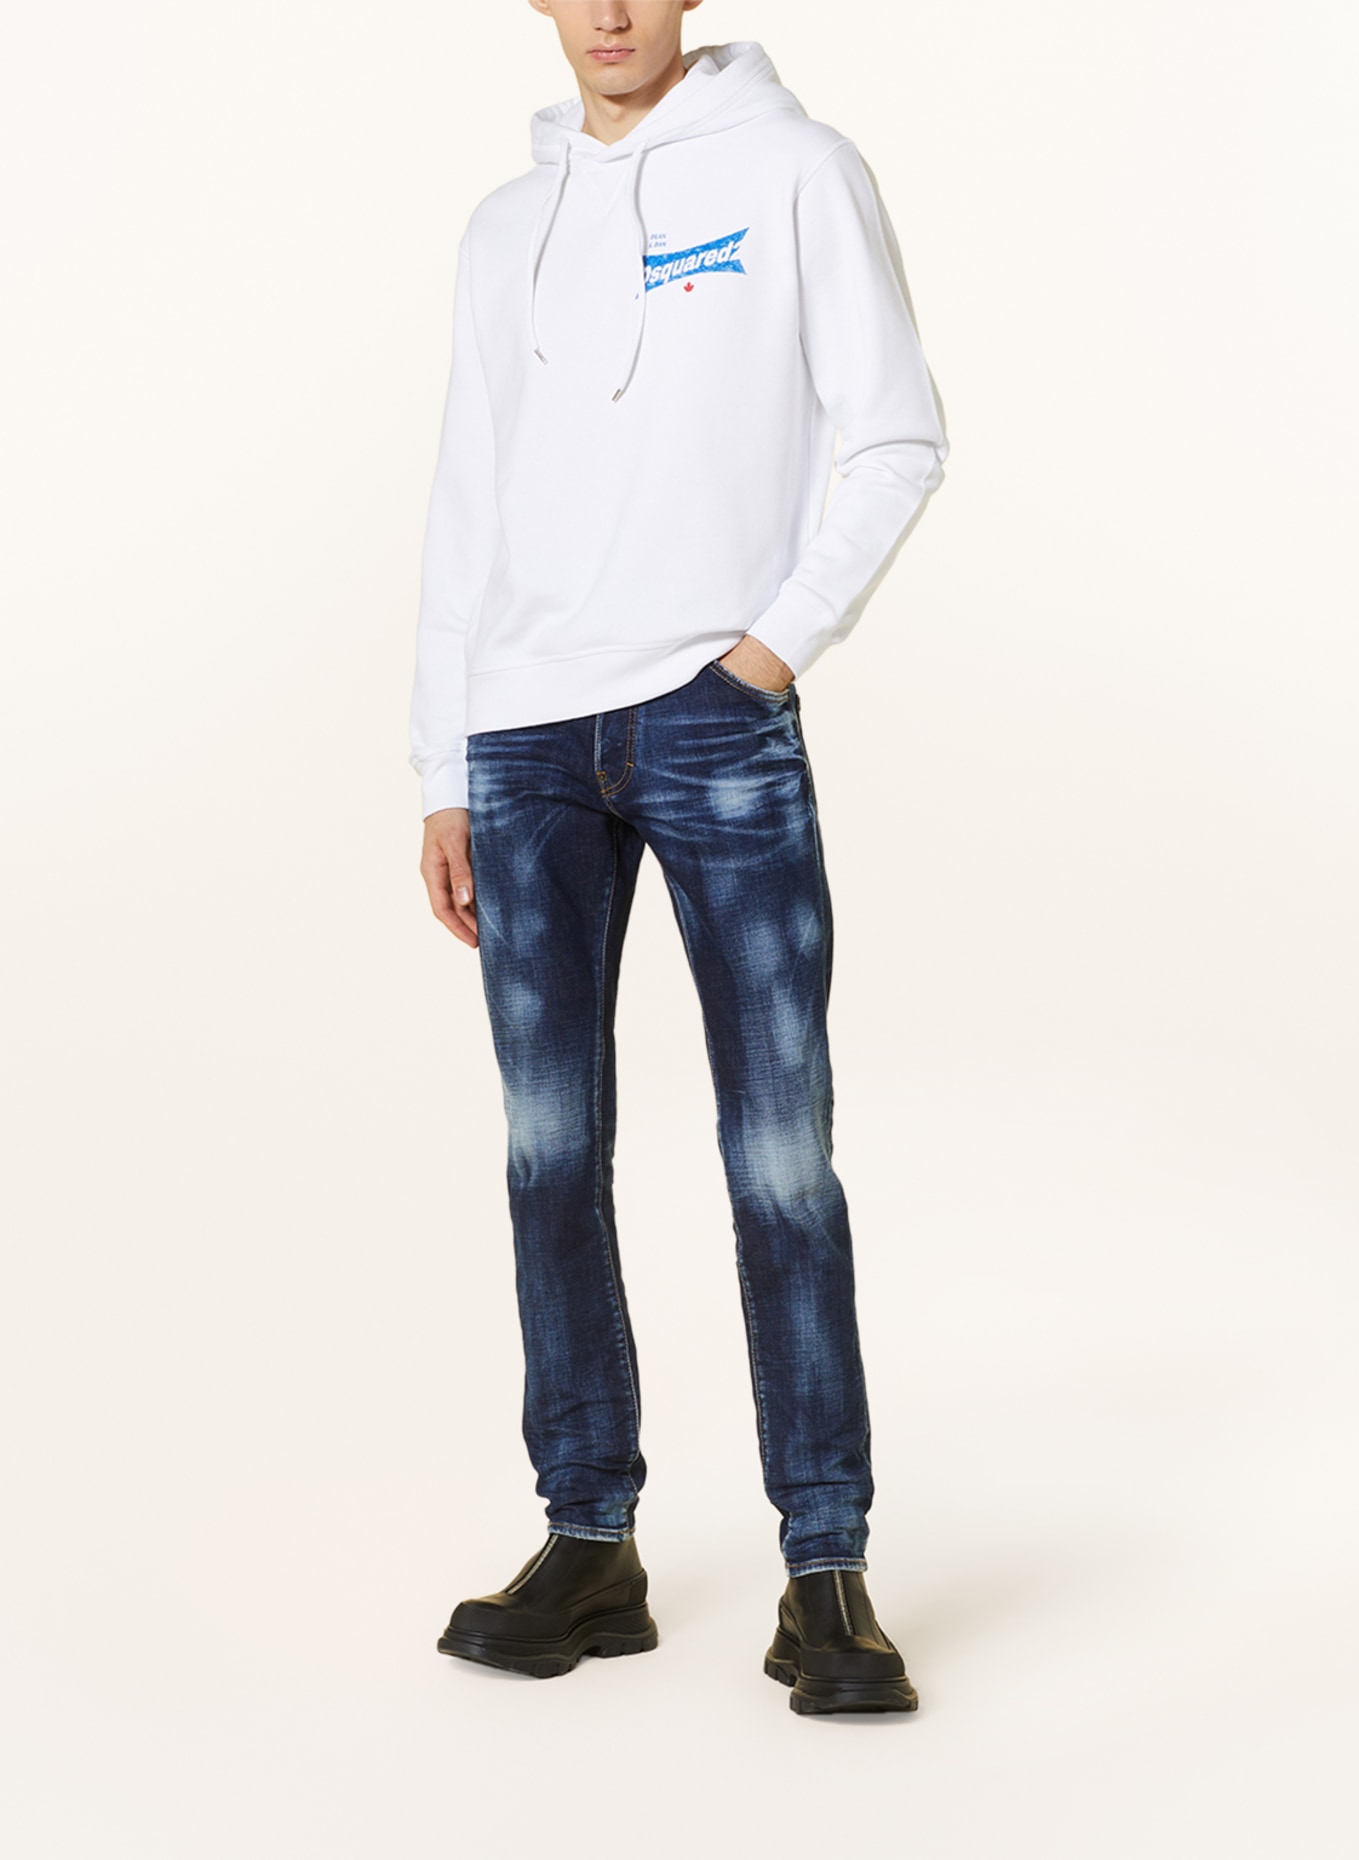 DSQUARED2 Hoodie, Color: WHITE (Image 2)